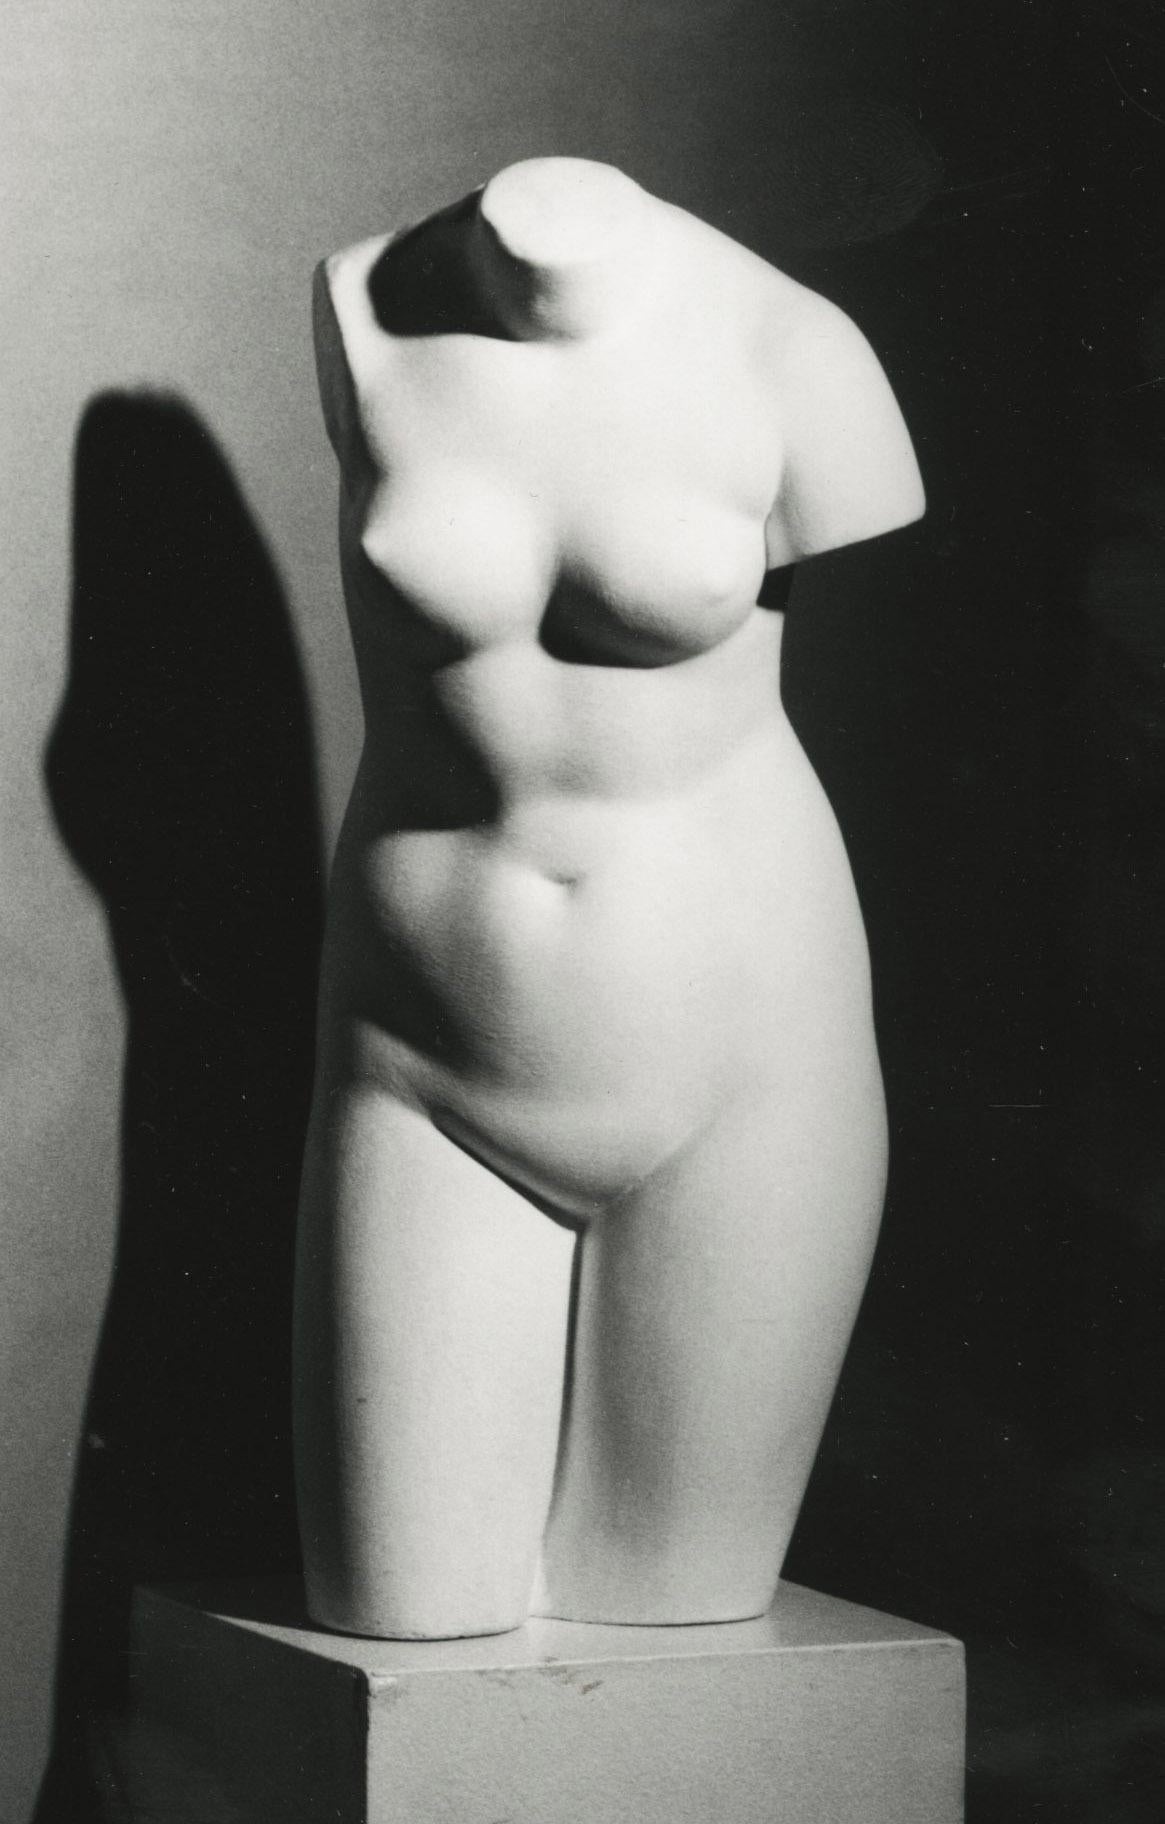 Classic - Photograph by Guenter Knop